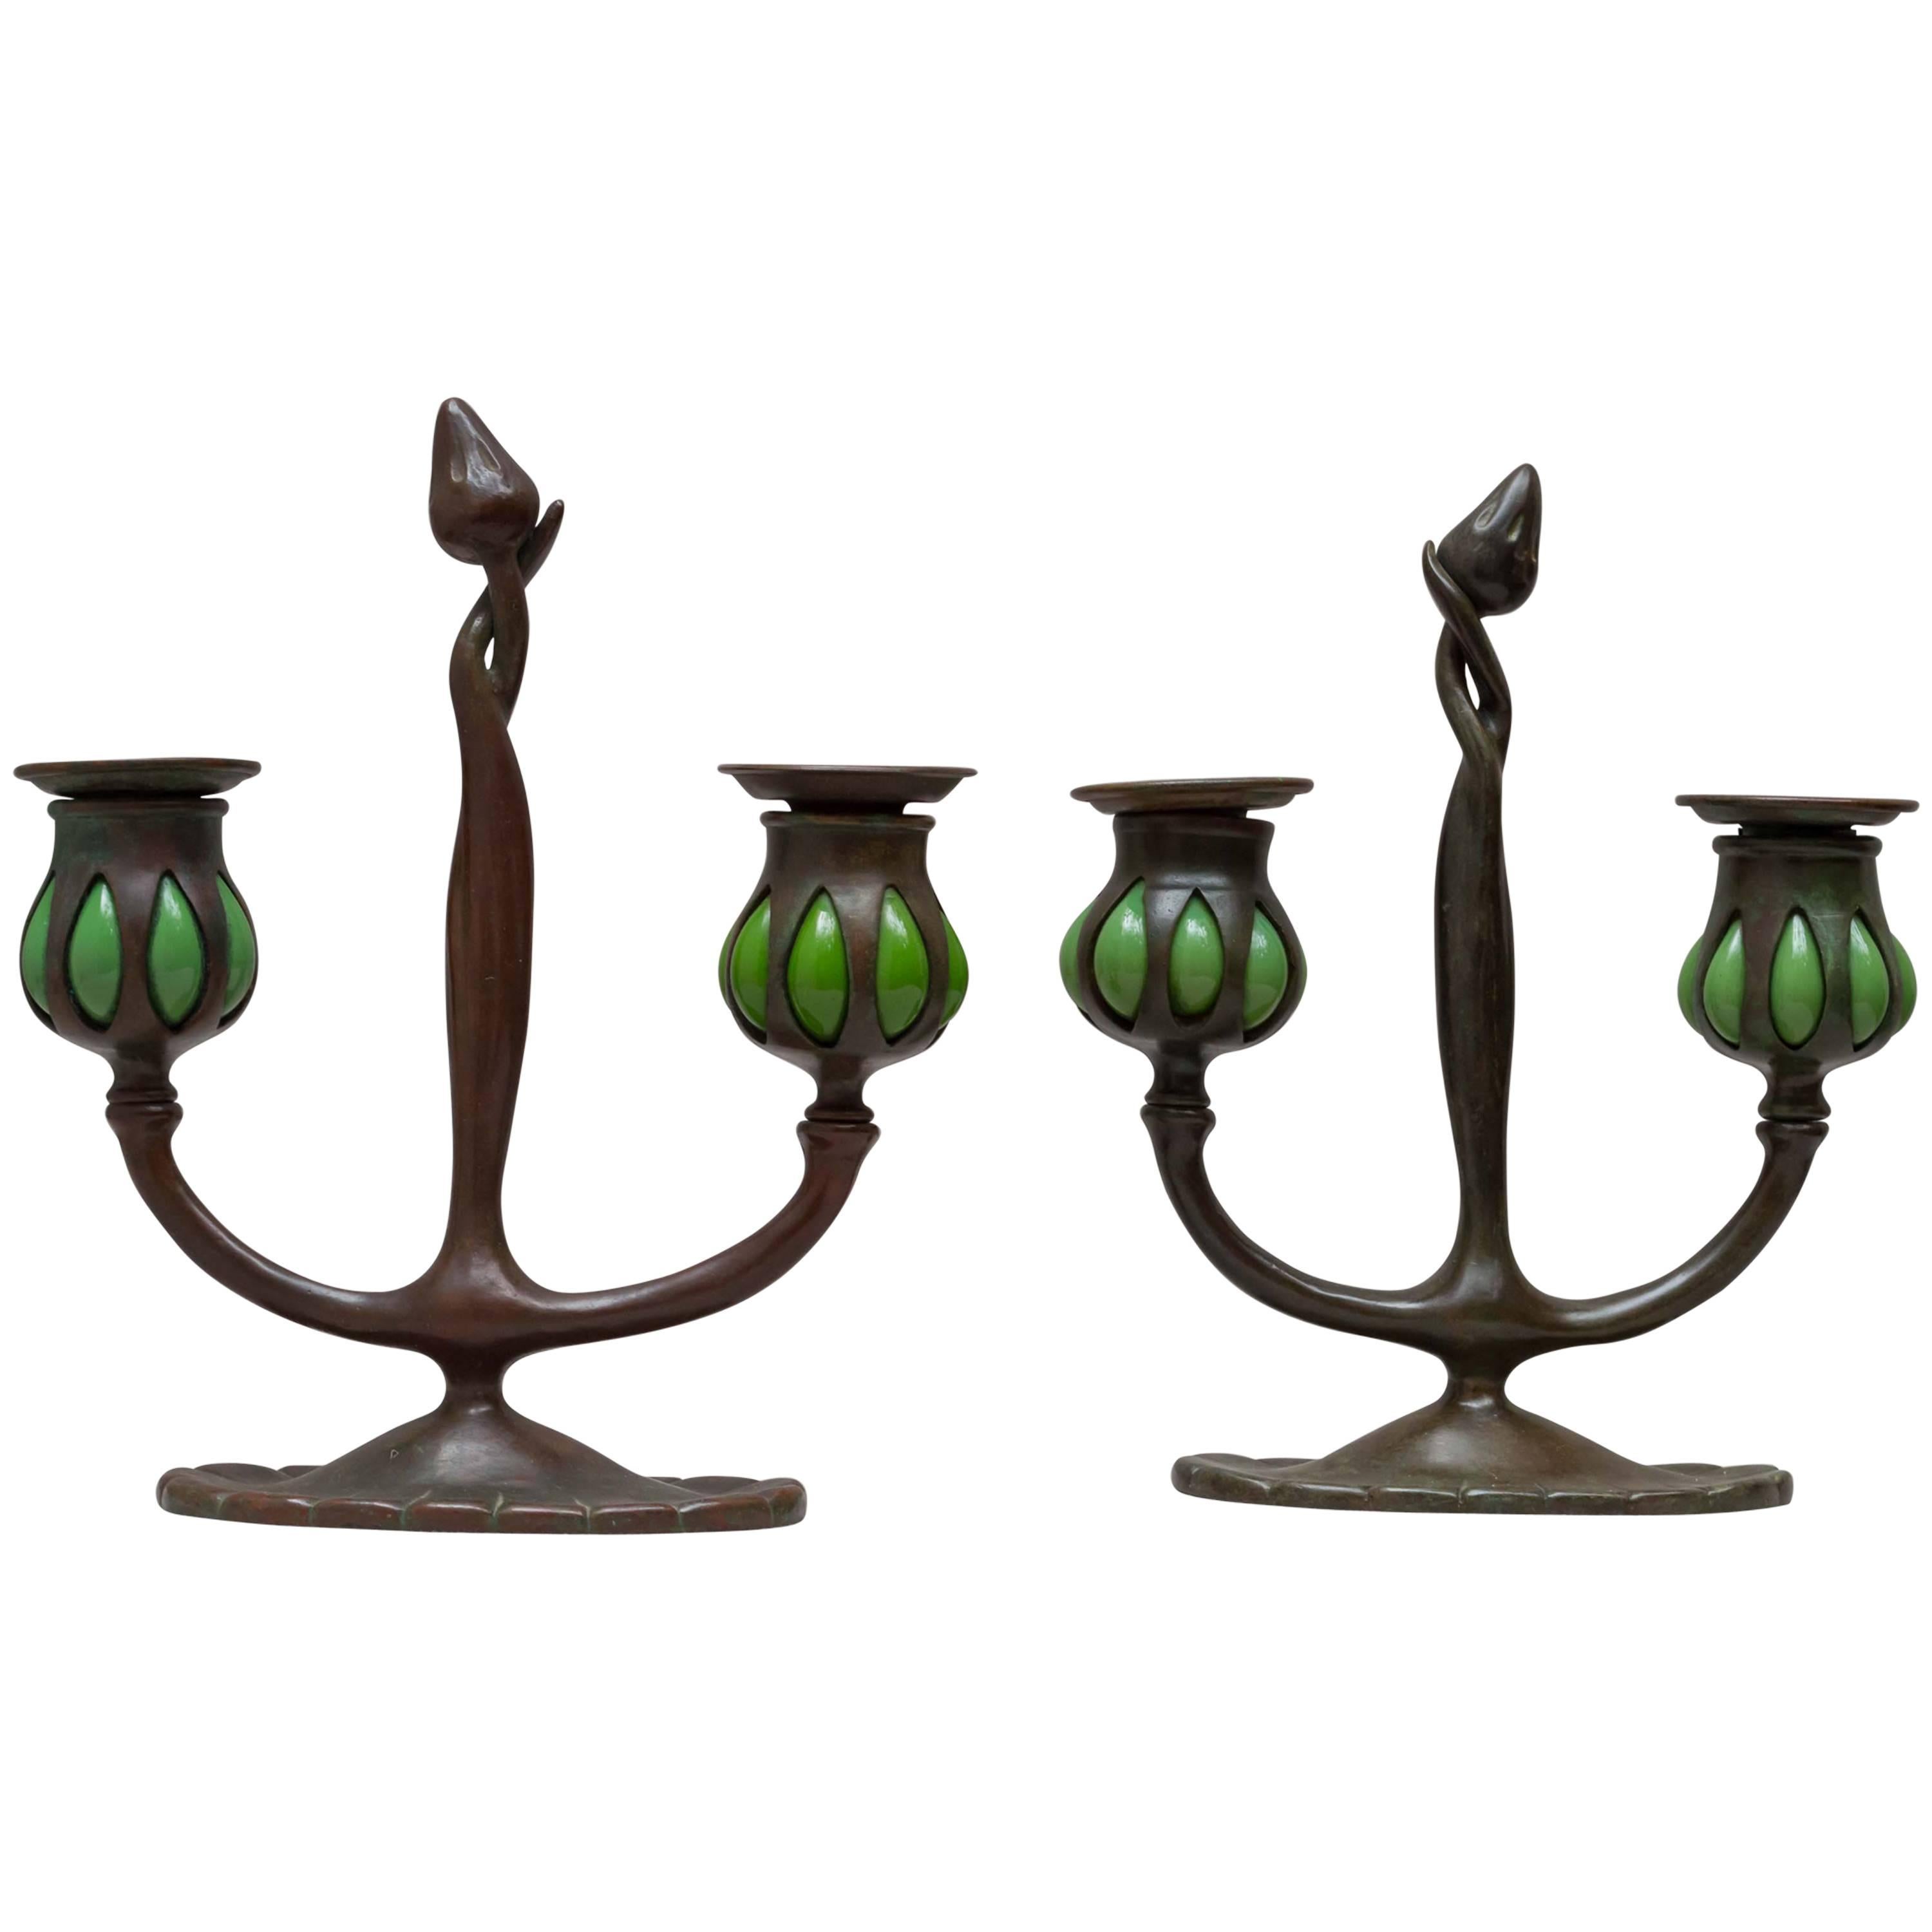 Pair of Signed Tiffany Studios Double Arm Candlesticks